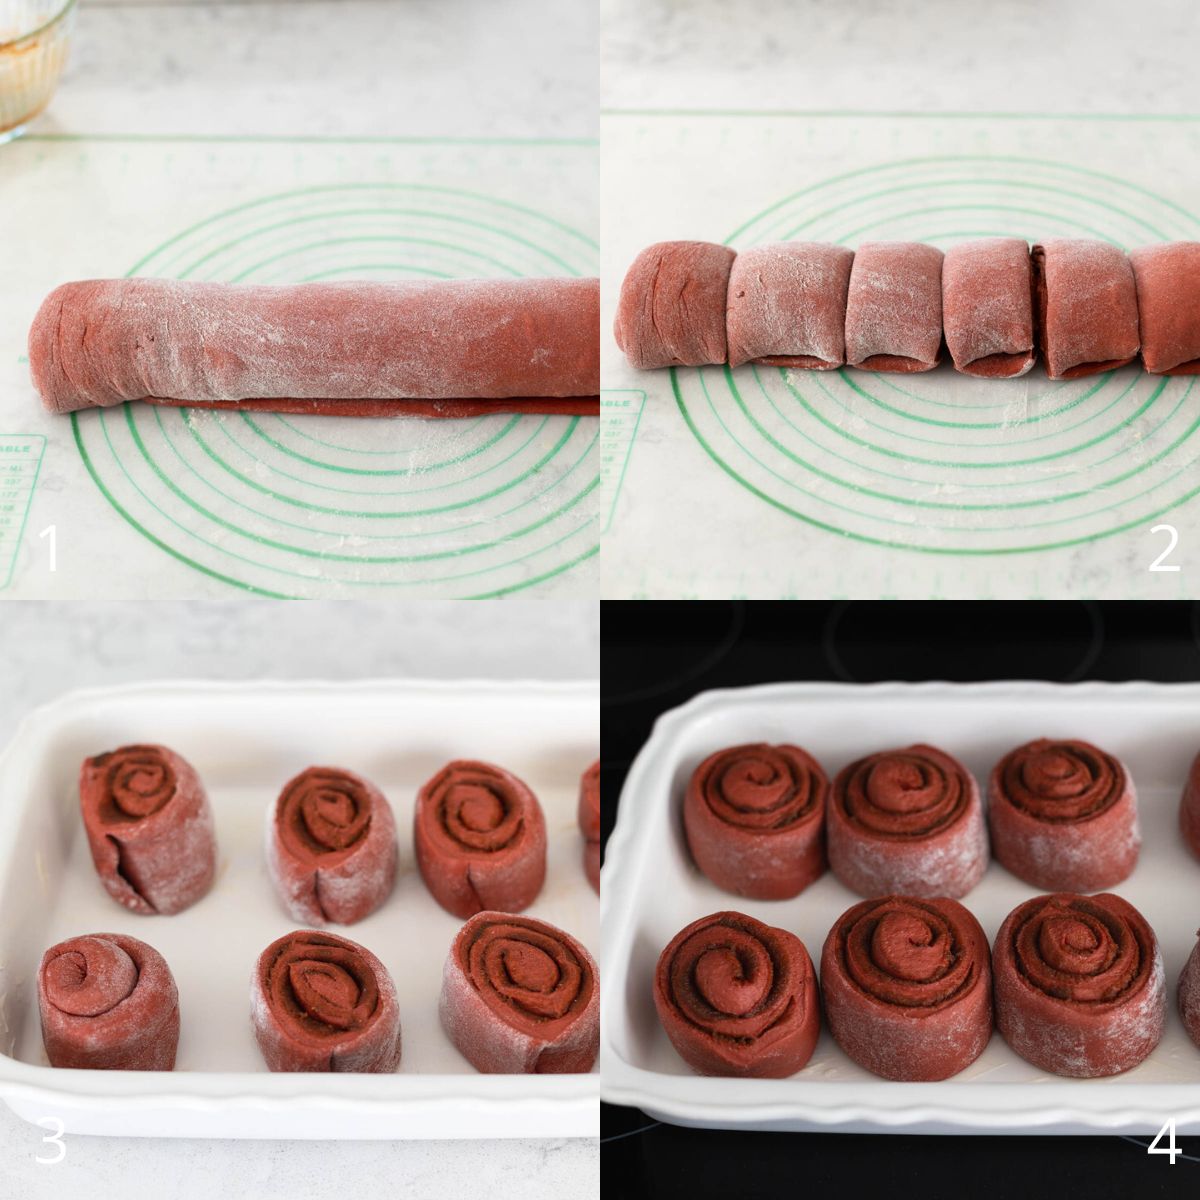 The step by step photos show how to cut and rise the rolls.